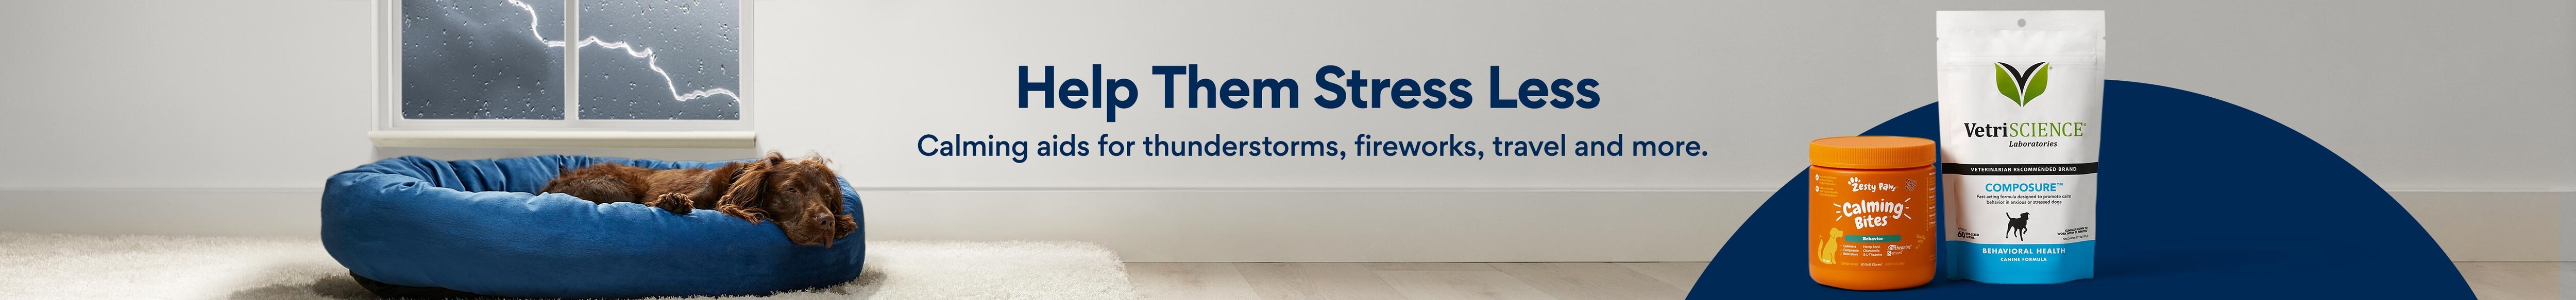 Help Them Stress Less. Calming aids for thunderstorms, fireworks, travel and more.